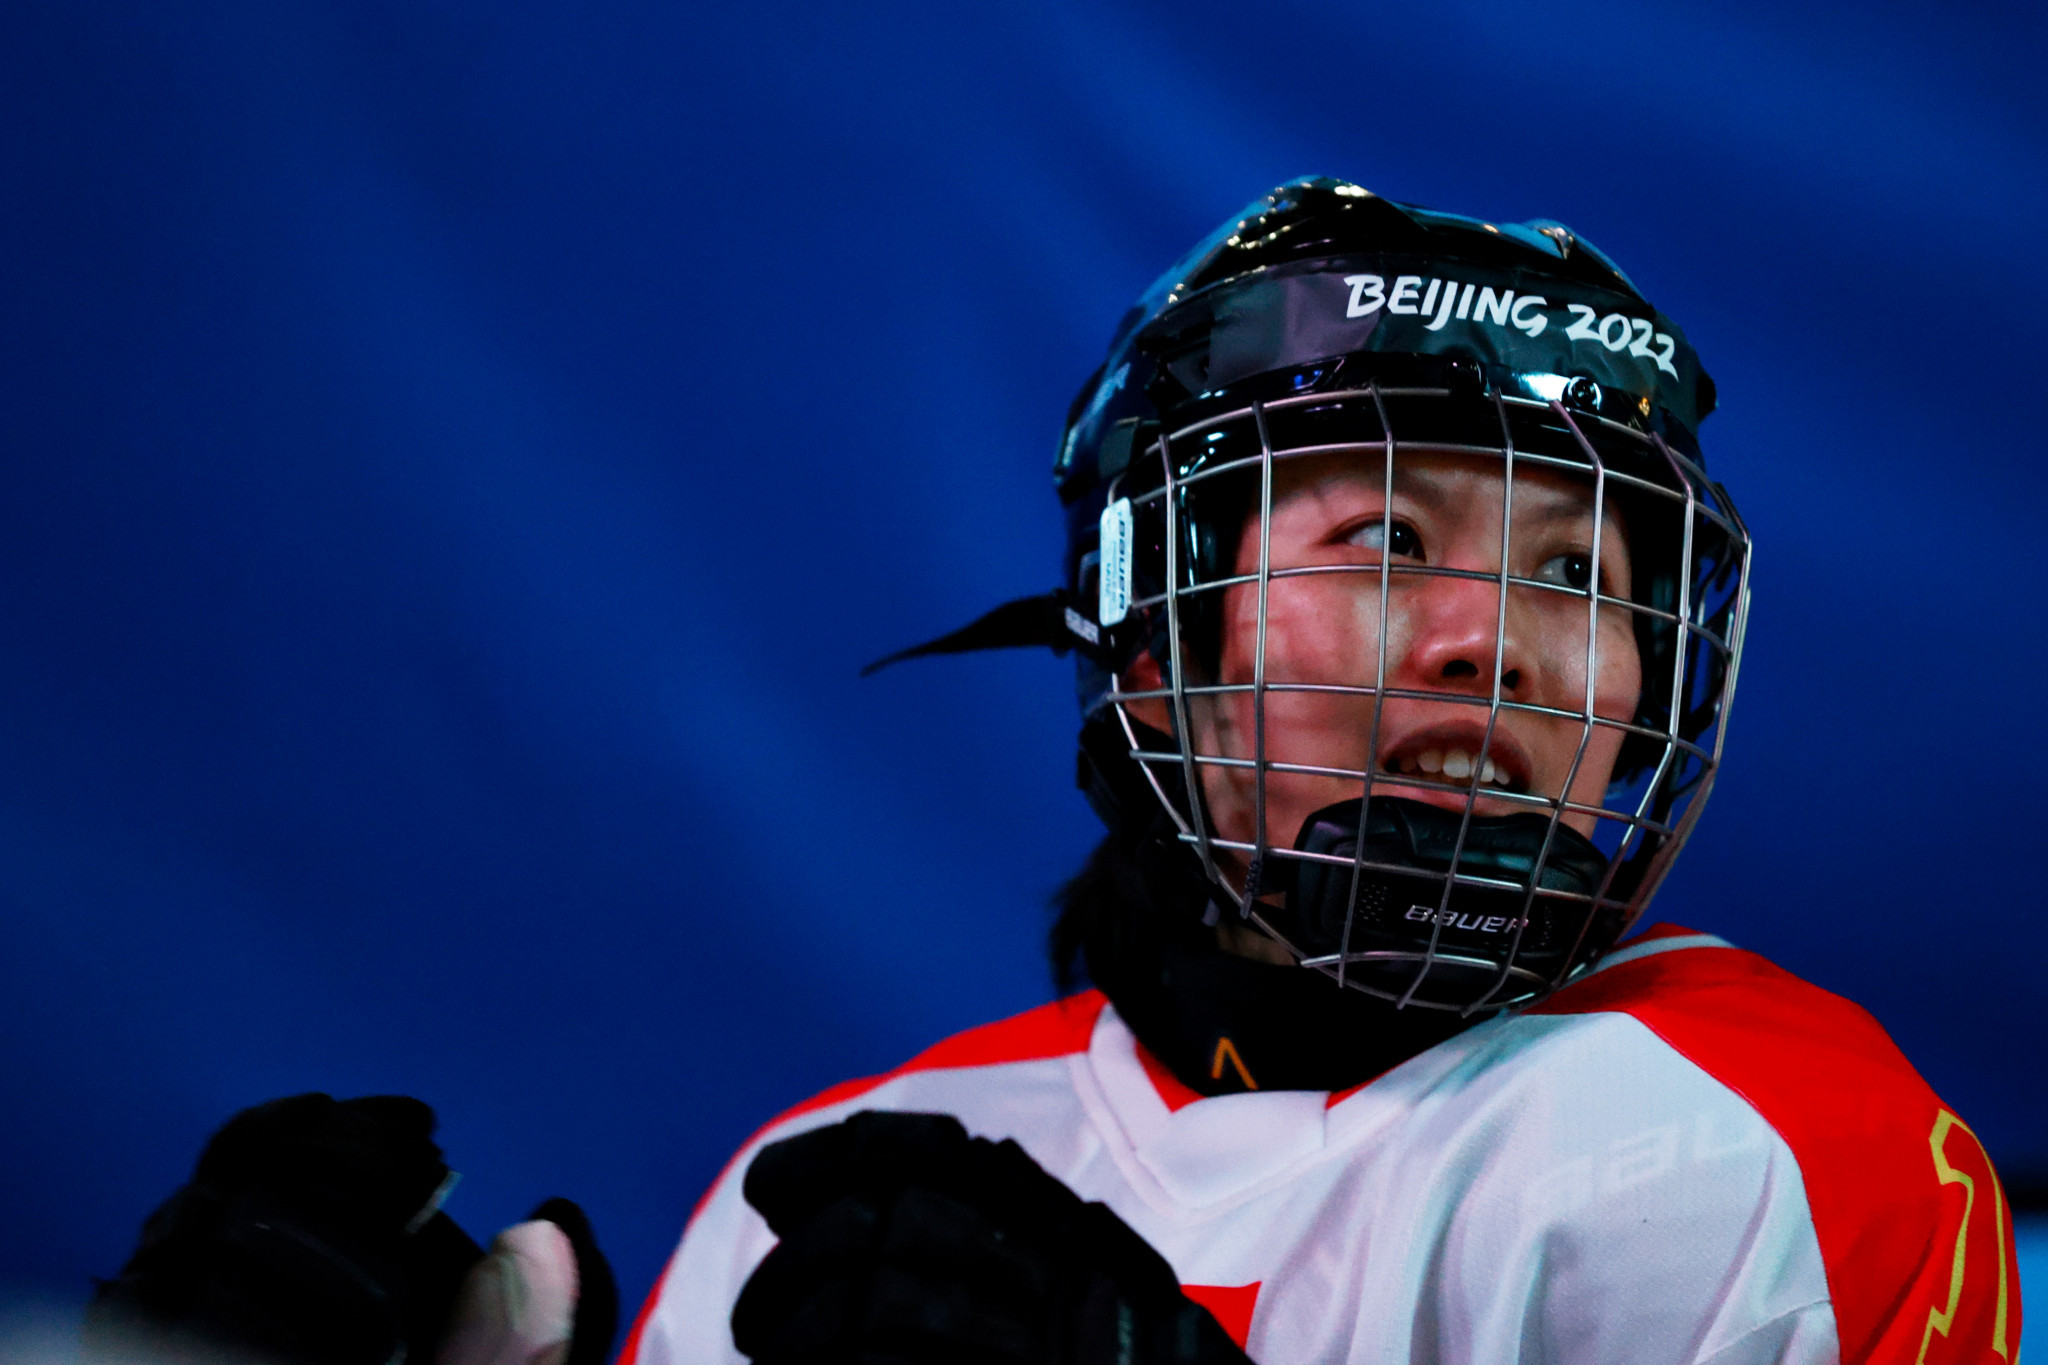 Yu Jing was the only woman to play in Beijing 2022's Para ice hockey tournament ©Getty Images